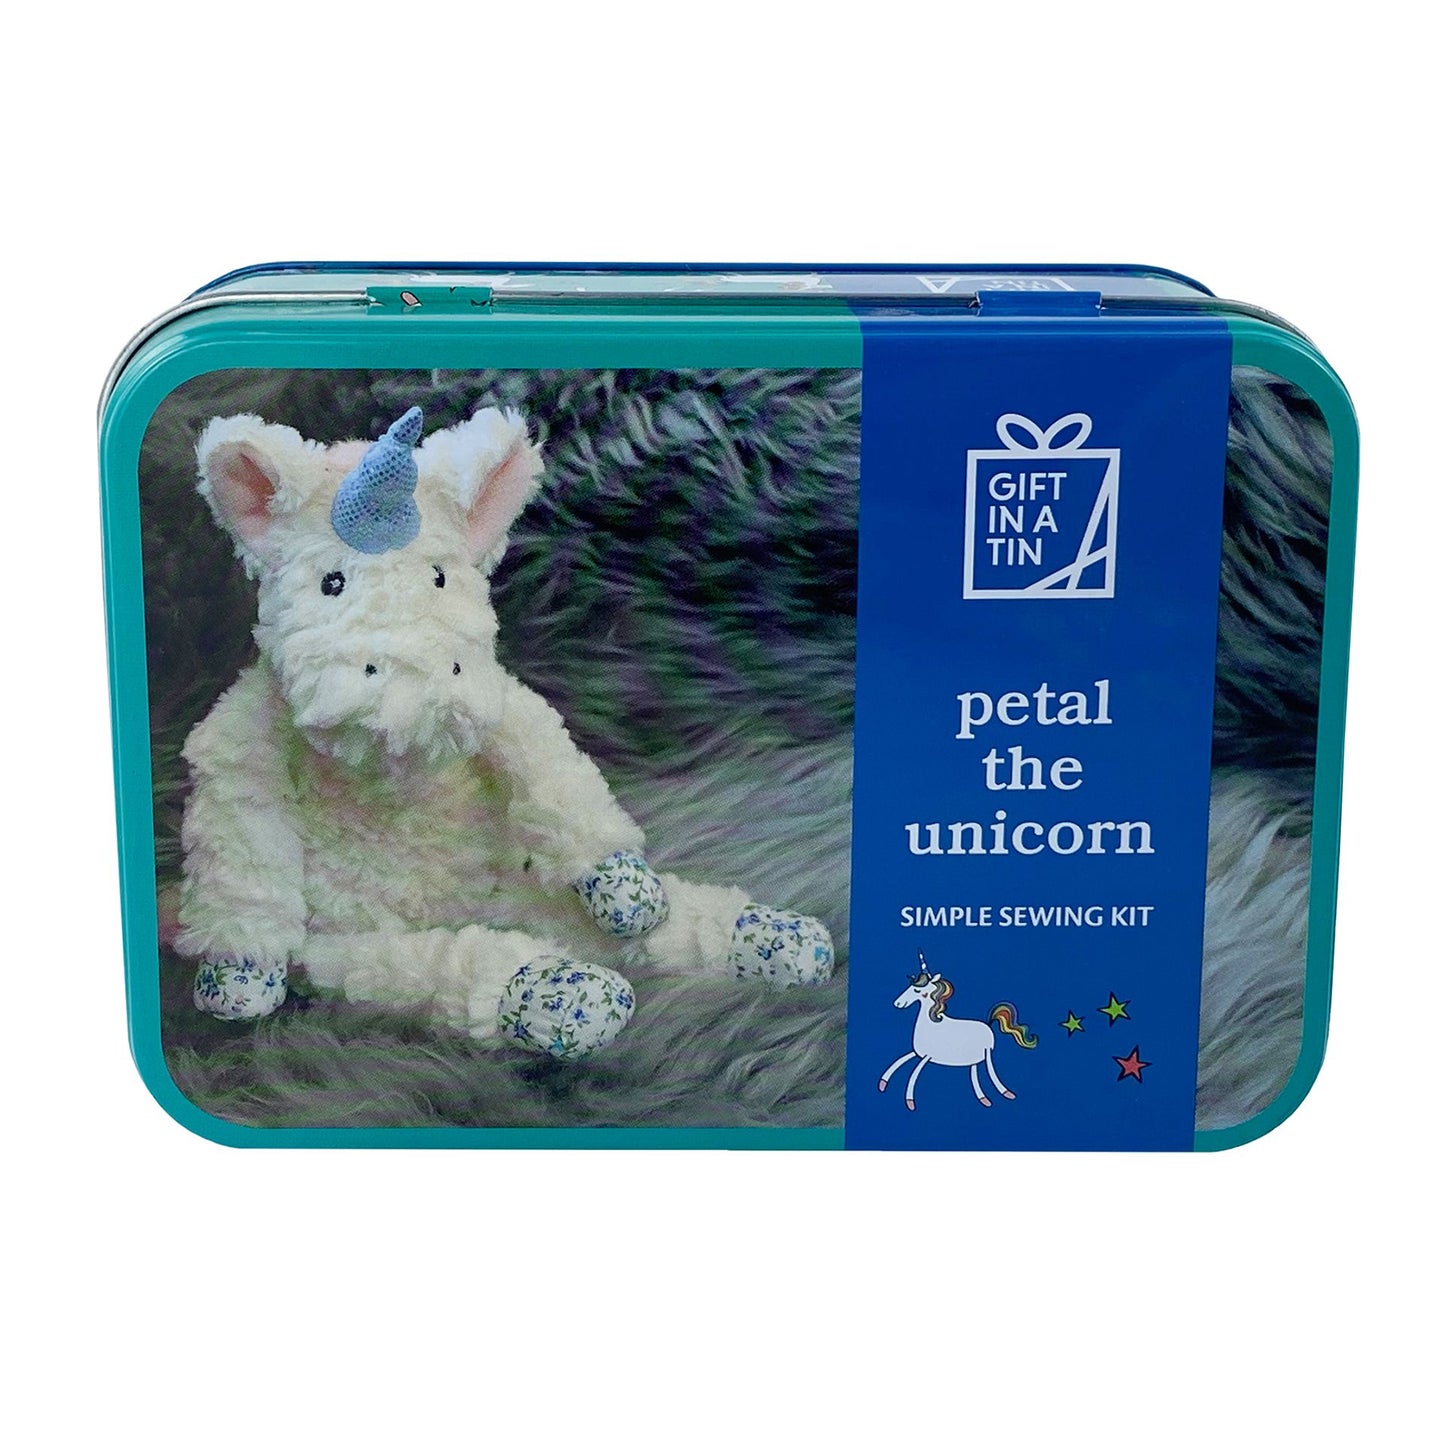 Apples To Pears Petal The Unicorn Kit Gift In A Tin